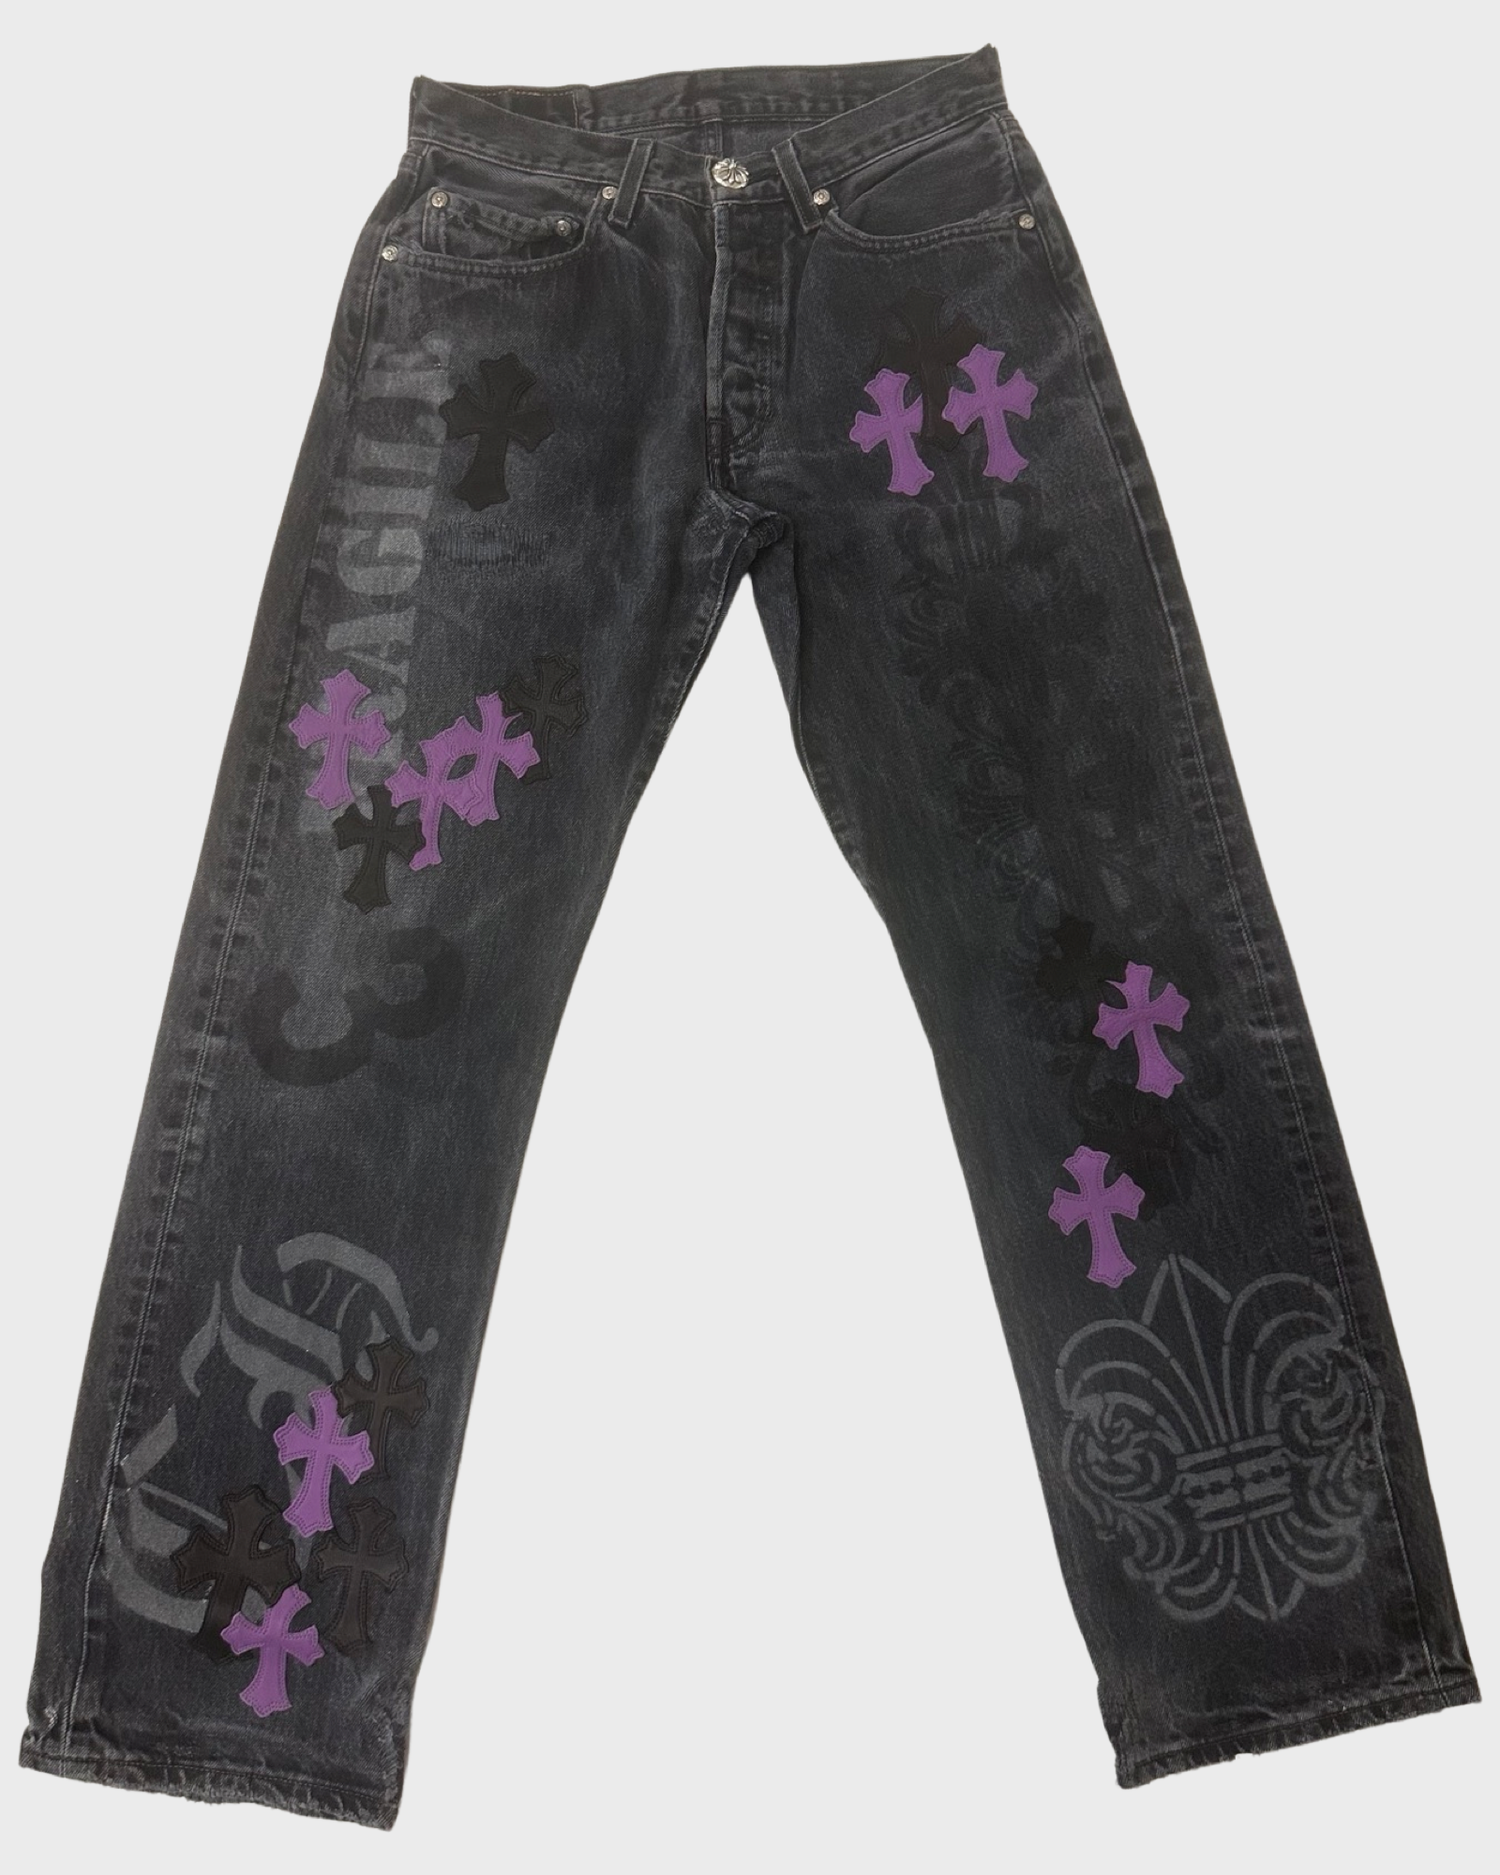 Chrome Hearts Straight-Leg Jeans - Blue, 11 Rise Jeans, Clothing